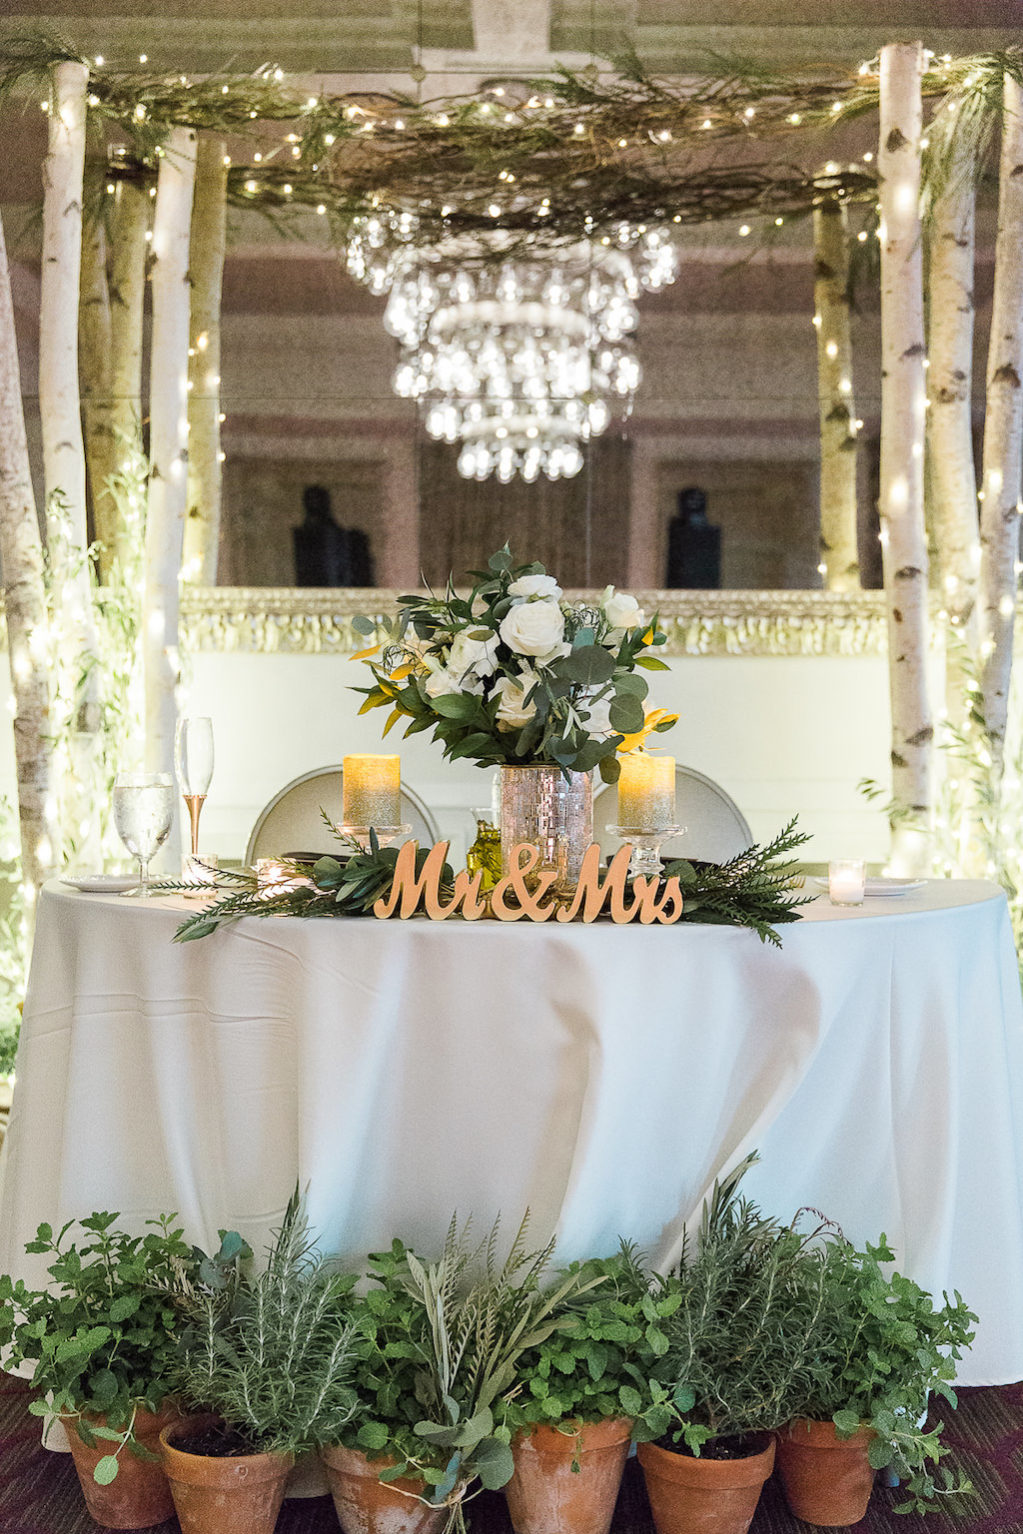 Natural Organic Wedding Reception Sweetheart Bride and Groom Table with Stylish Gold Mr and Mrs Letters, Herbs Growing in Ceramic Pots, Greenery and Silver Pillar Candle Table Decor, and White Birch Tree and Branches with String Lights Arch | Downtown St Pete Hotel Wedding Venue The Birchwood